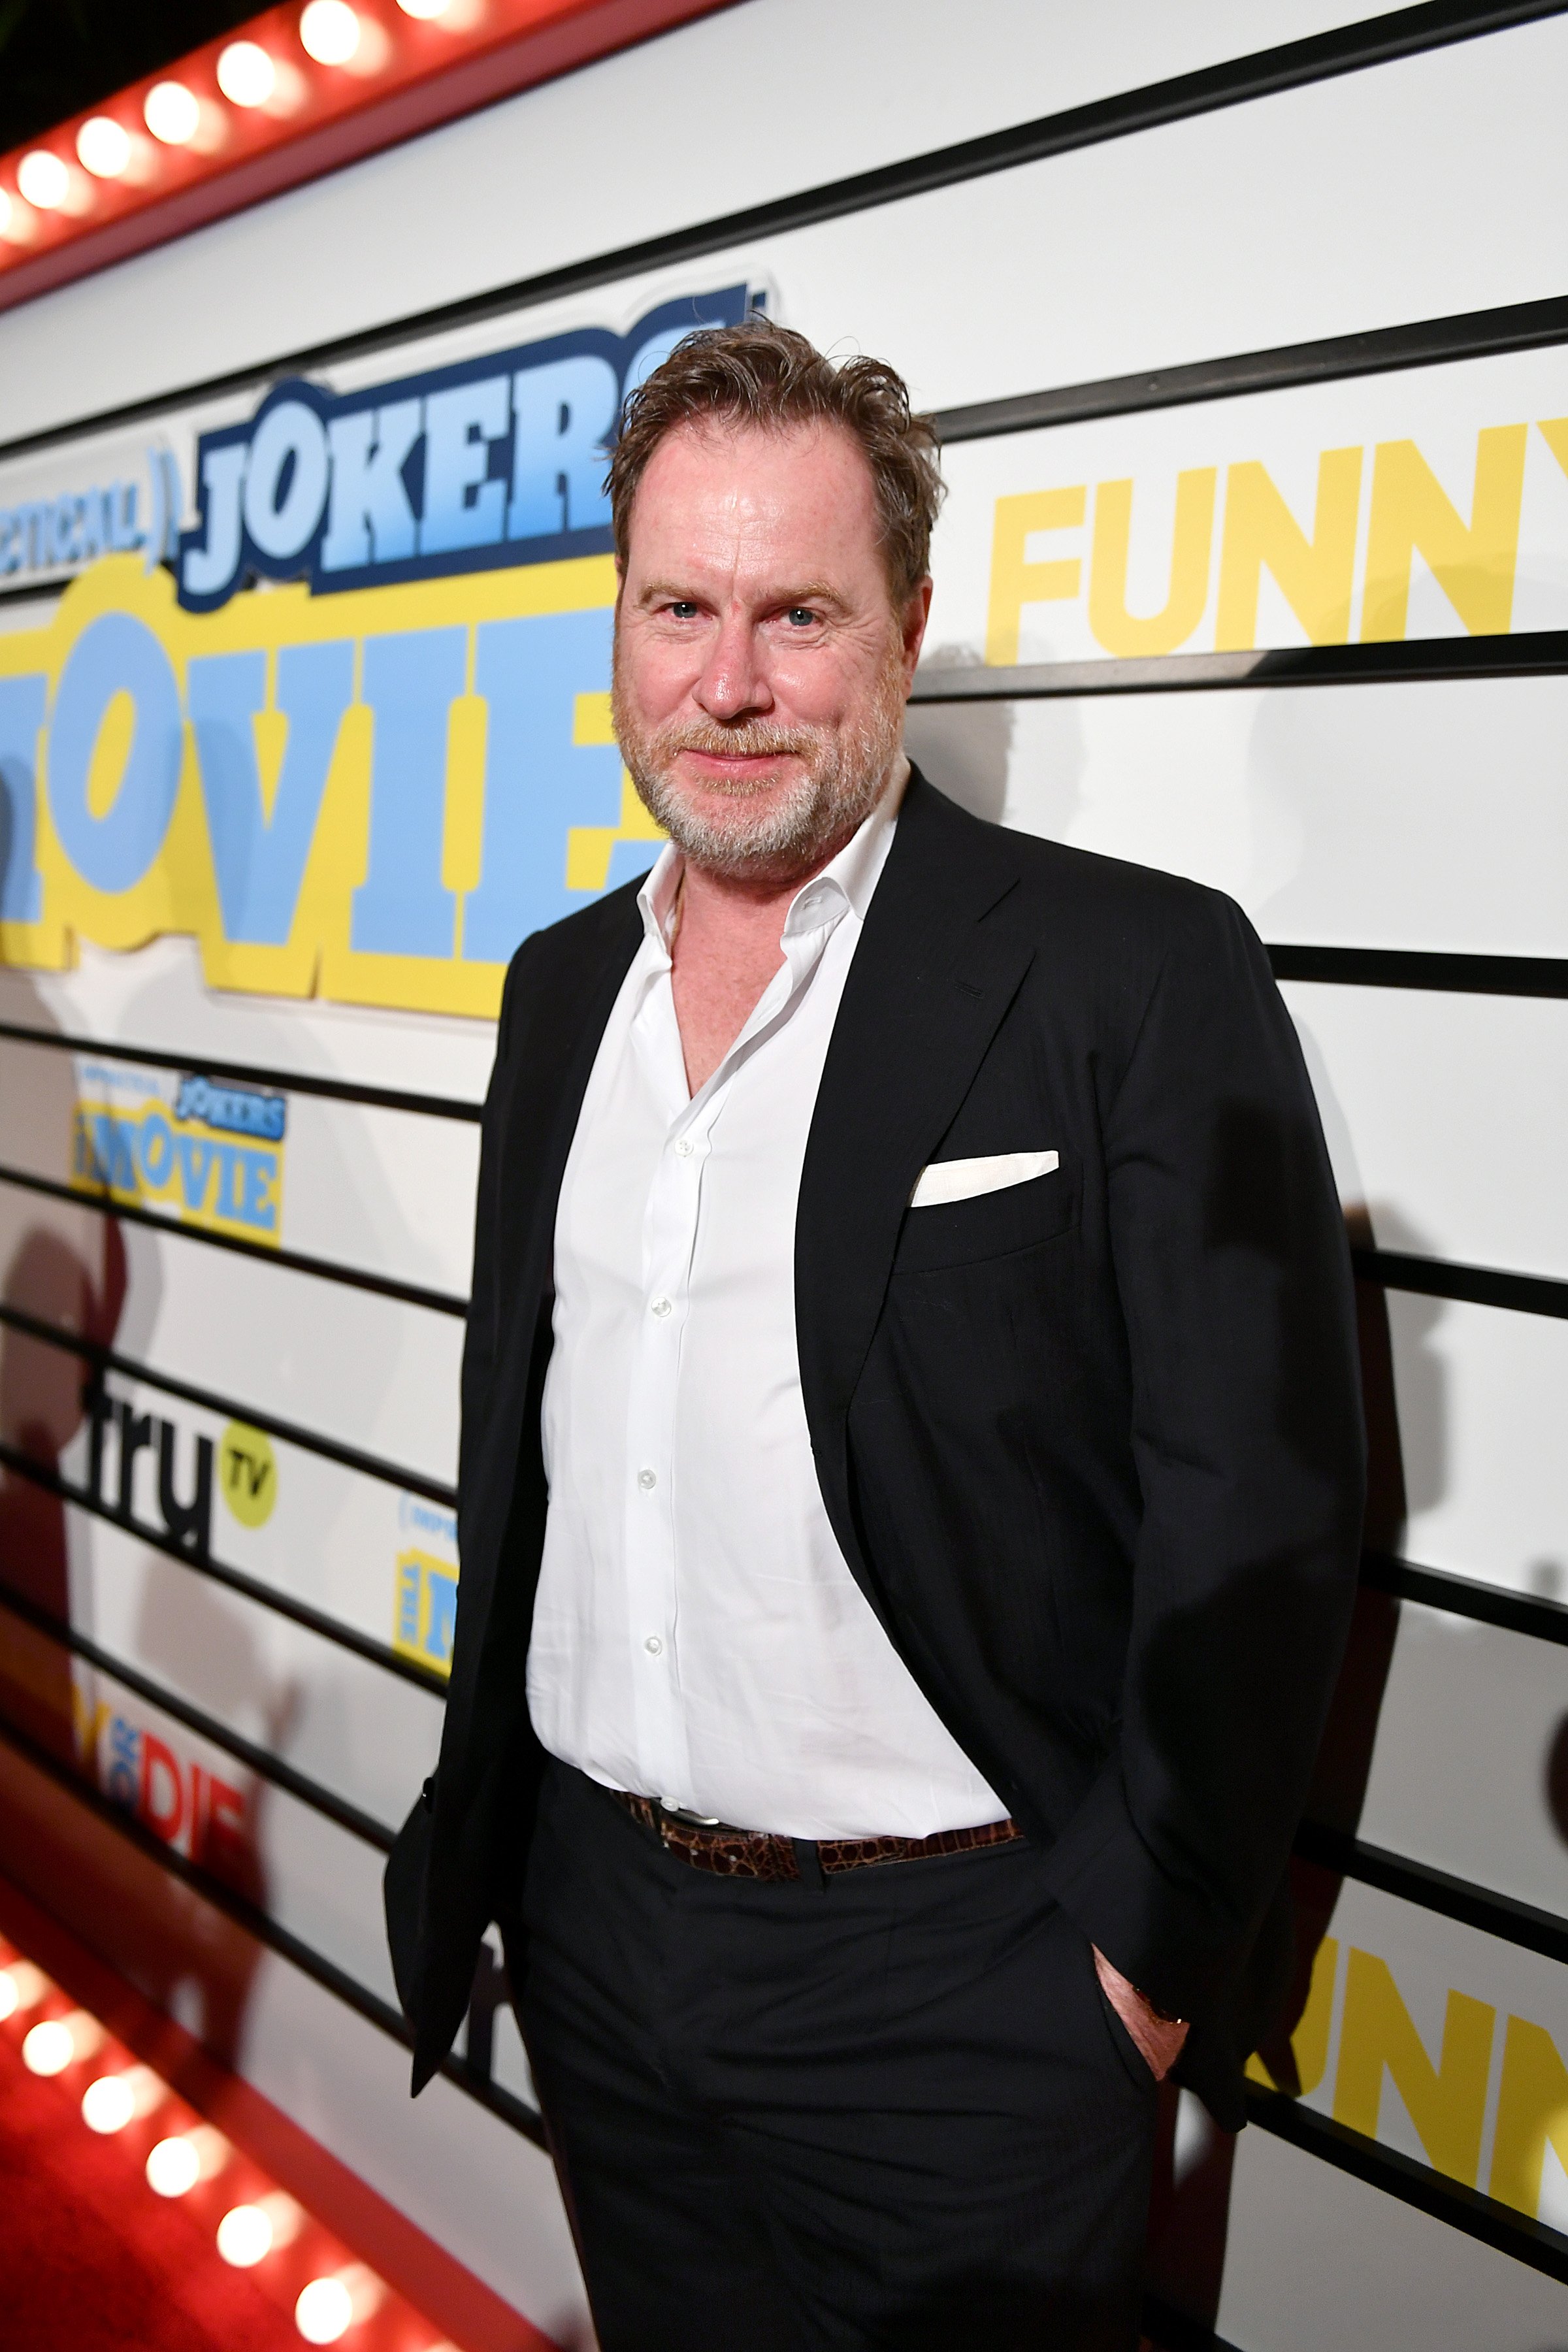 Chris Henchy at the "Impractical Jokers: The Movie" premiere screening and party on February 18, 2020, in New York City. | Source: Getty Images